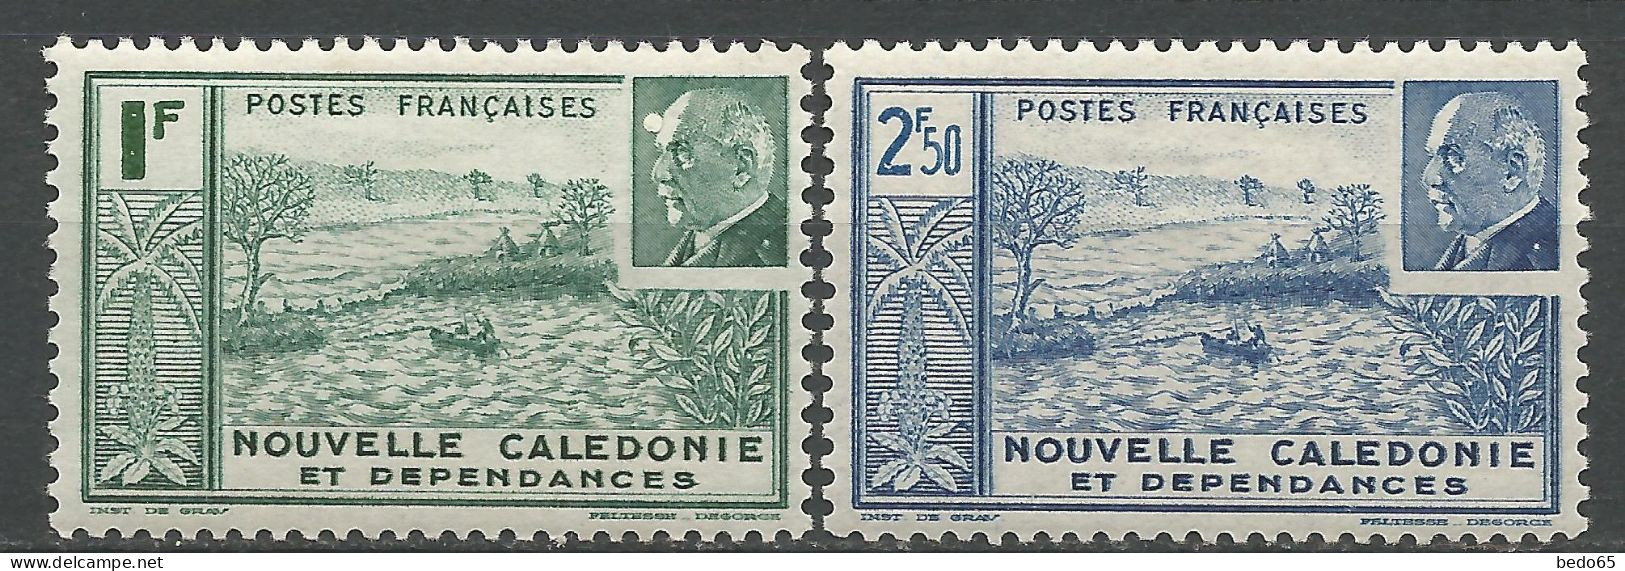 NOUVELLE-CALEDONIE N° 193 Et 194 NEUF*  TRACE DE CHARNIERE  / Hinge / MH - Unused Stamps